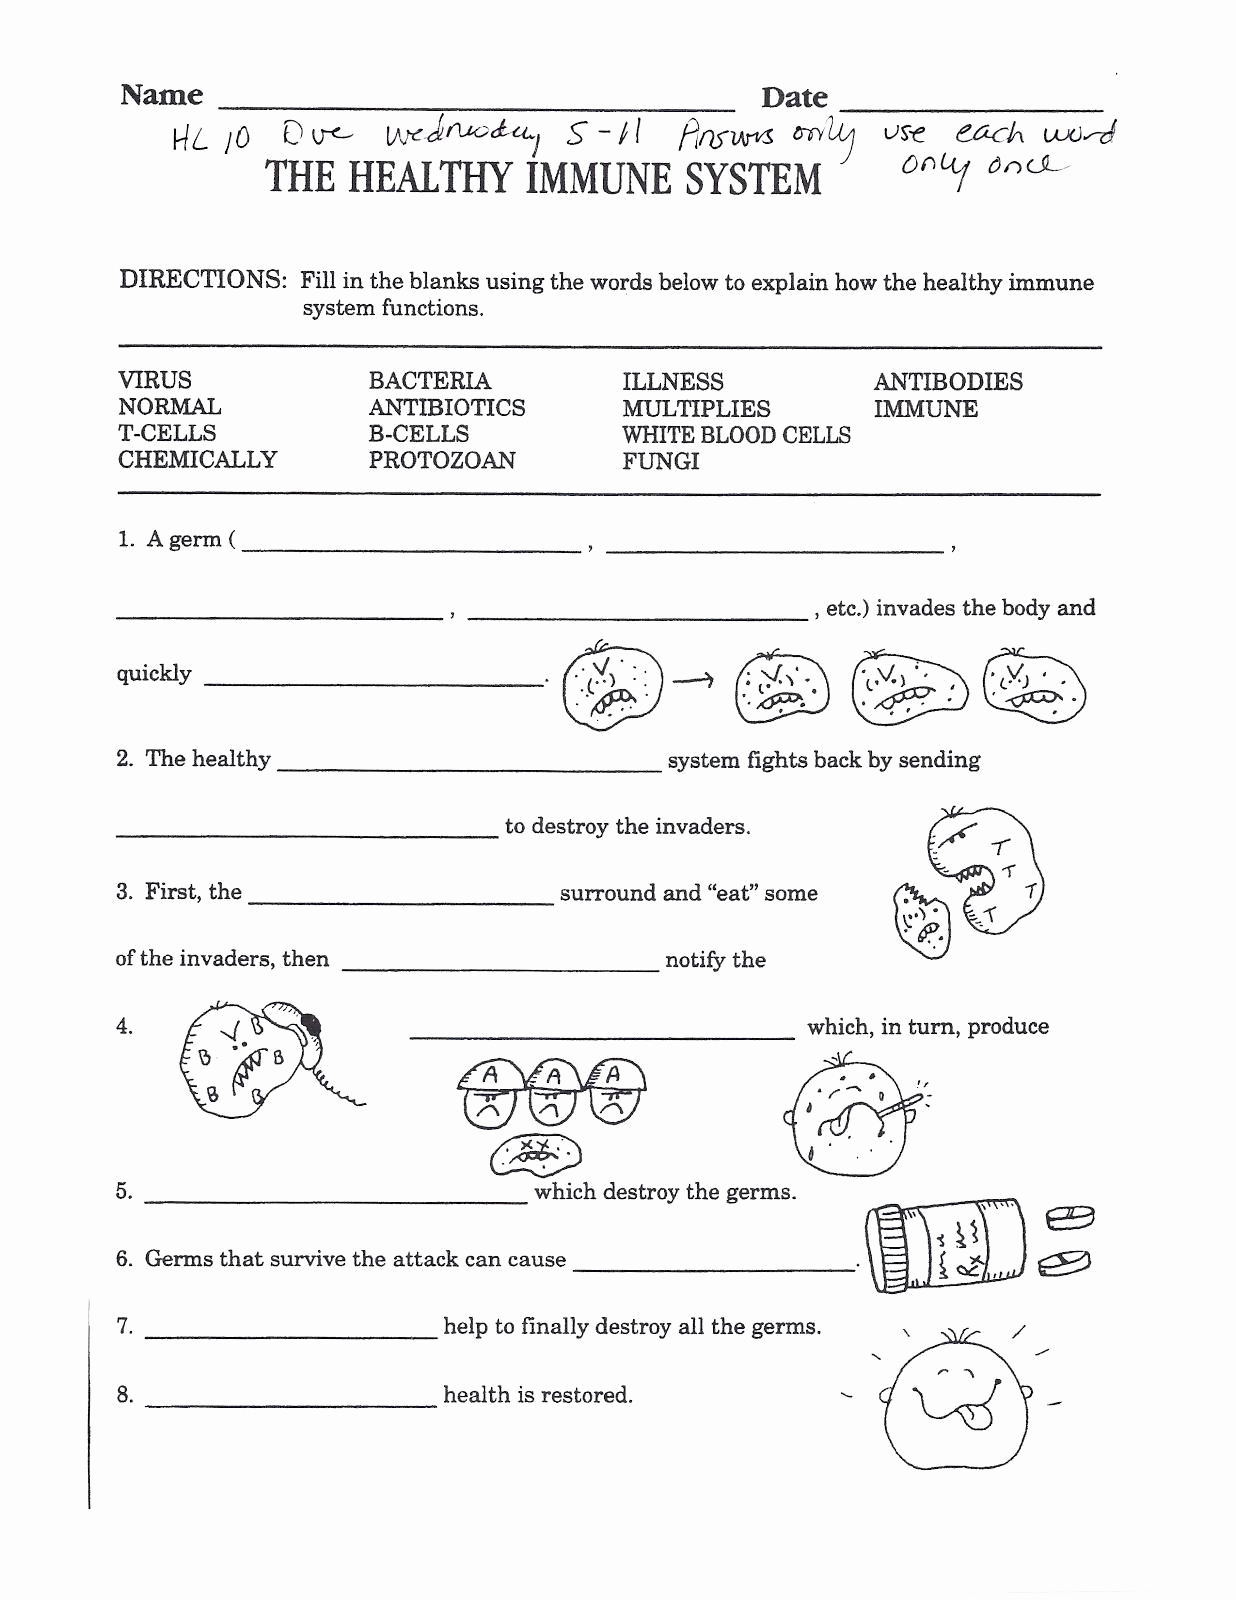 Middle School Health Worksheets Best Of Middle School Health Worksheets Pdf